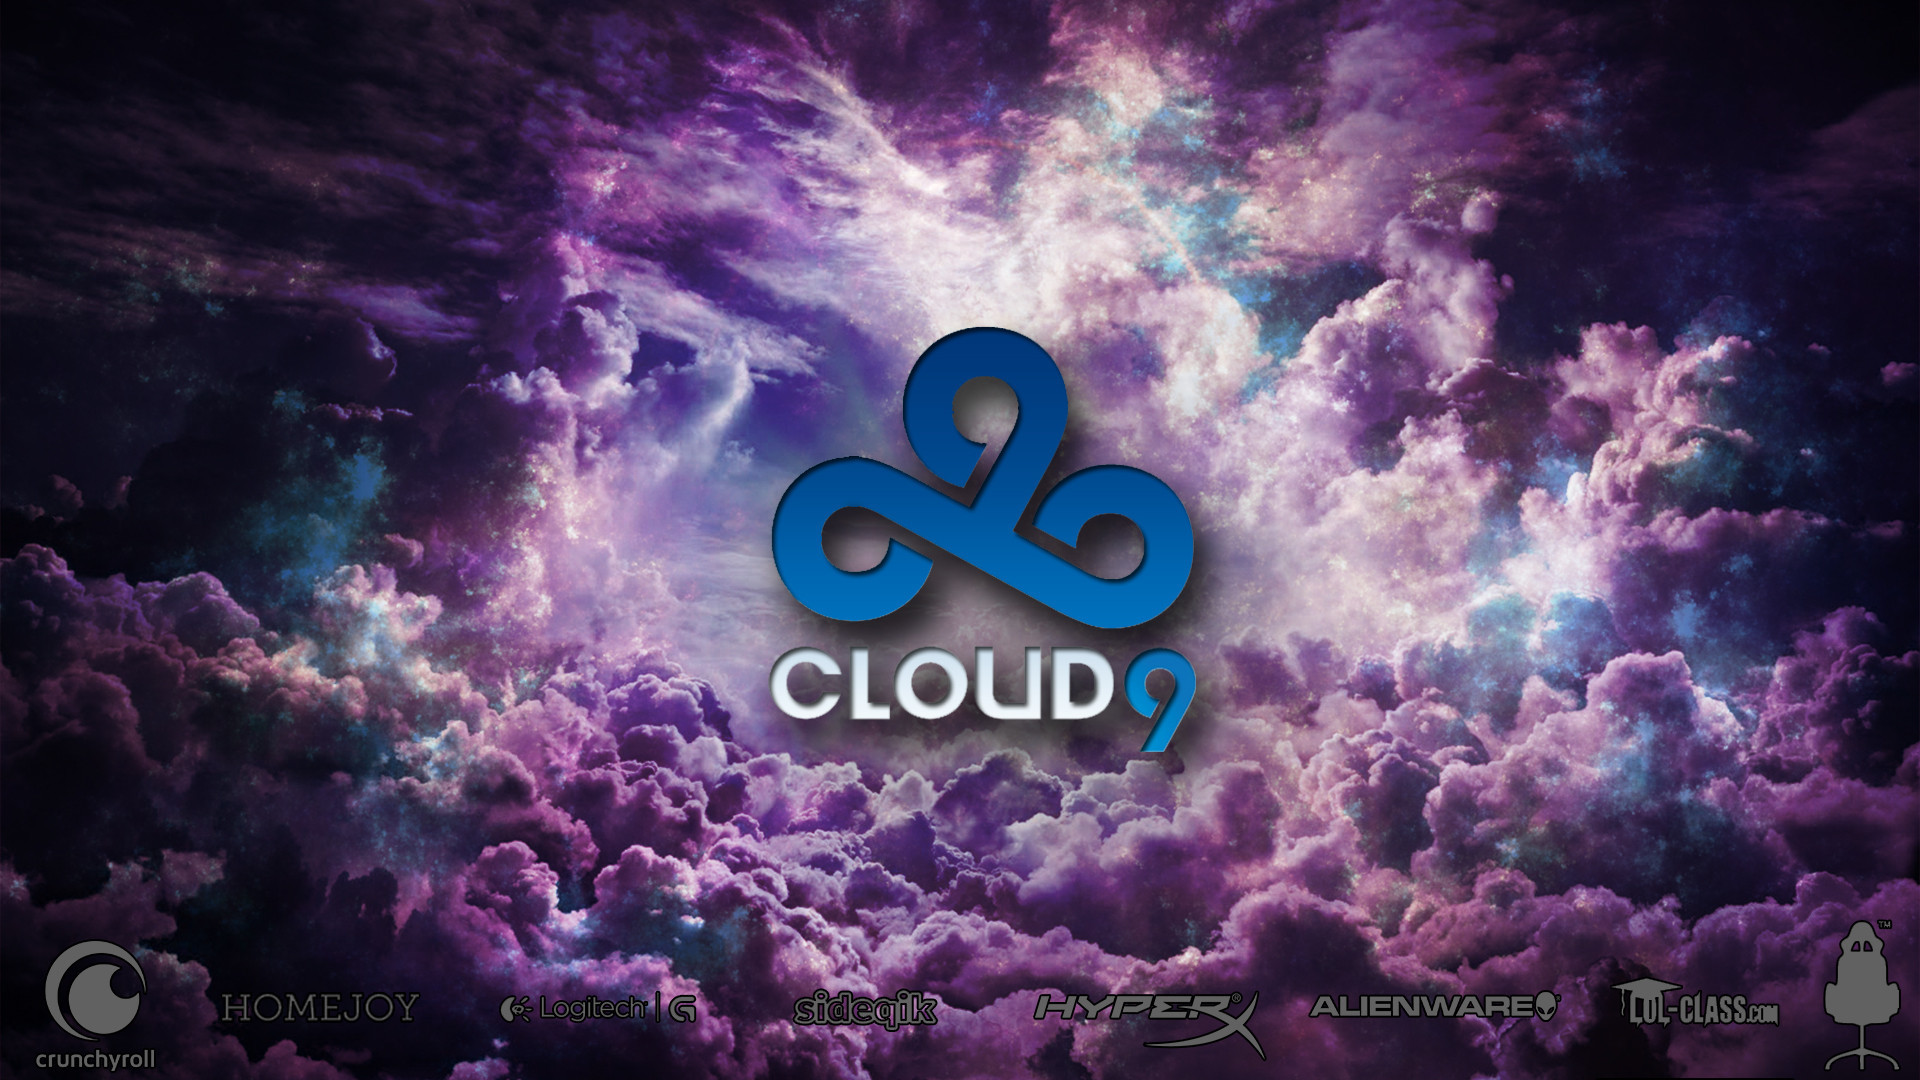 1920x1080 Cloud 9 Wallpaper with Sponsors [] (I will post other resolutions  if requested)